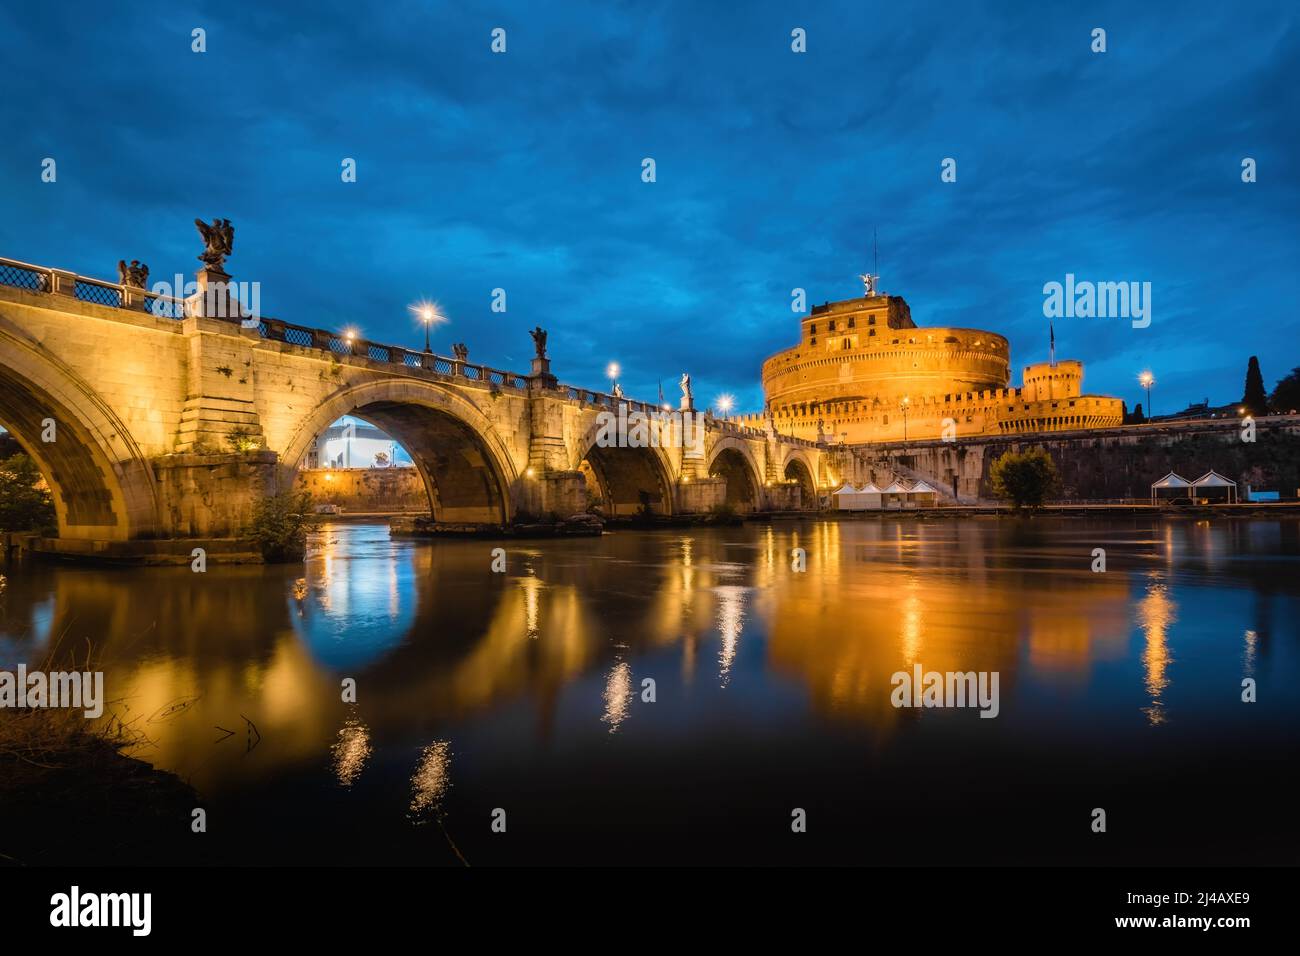 Mausoleum of Hadrian or Castel Sant'Angelo in Rome, Italy under the Blue Hour Sky at Dusk Stock Photo